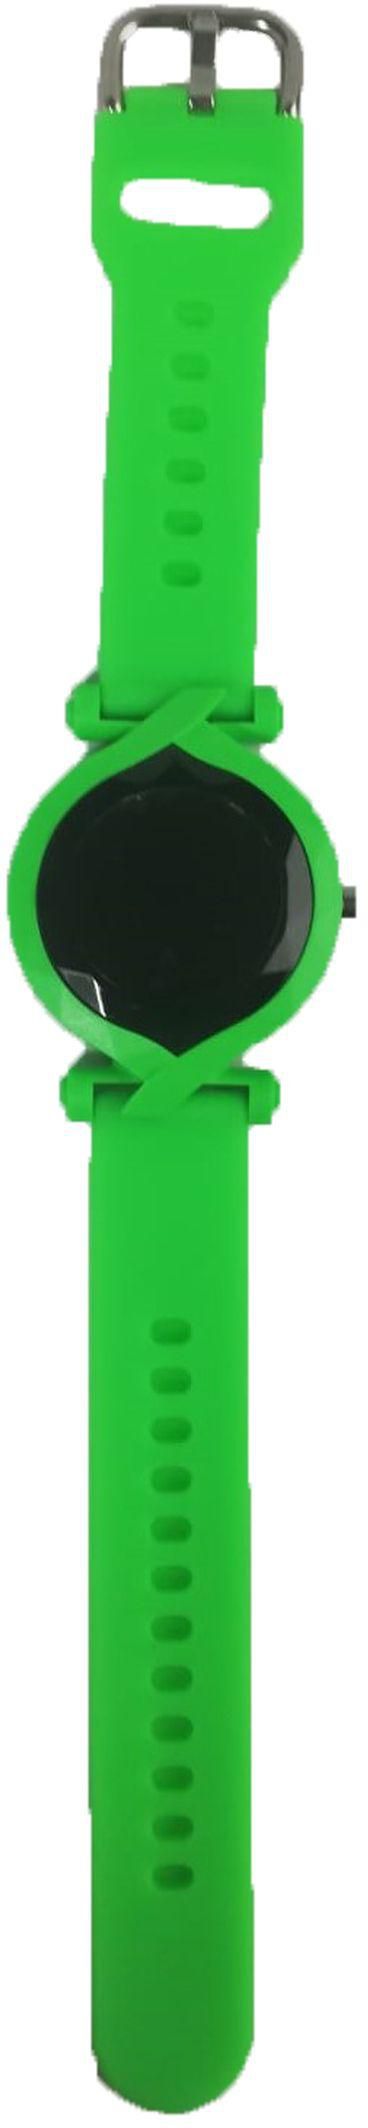 Girls Digital Watch With A Modern Design,green Color Rubber Strap